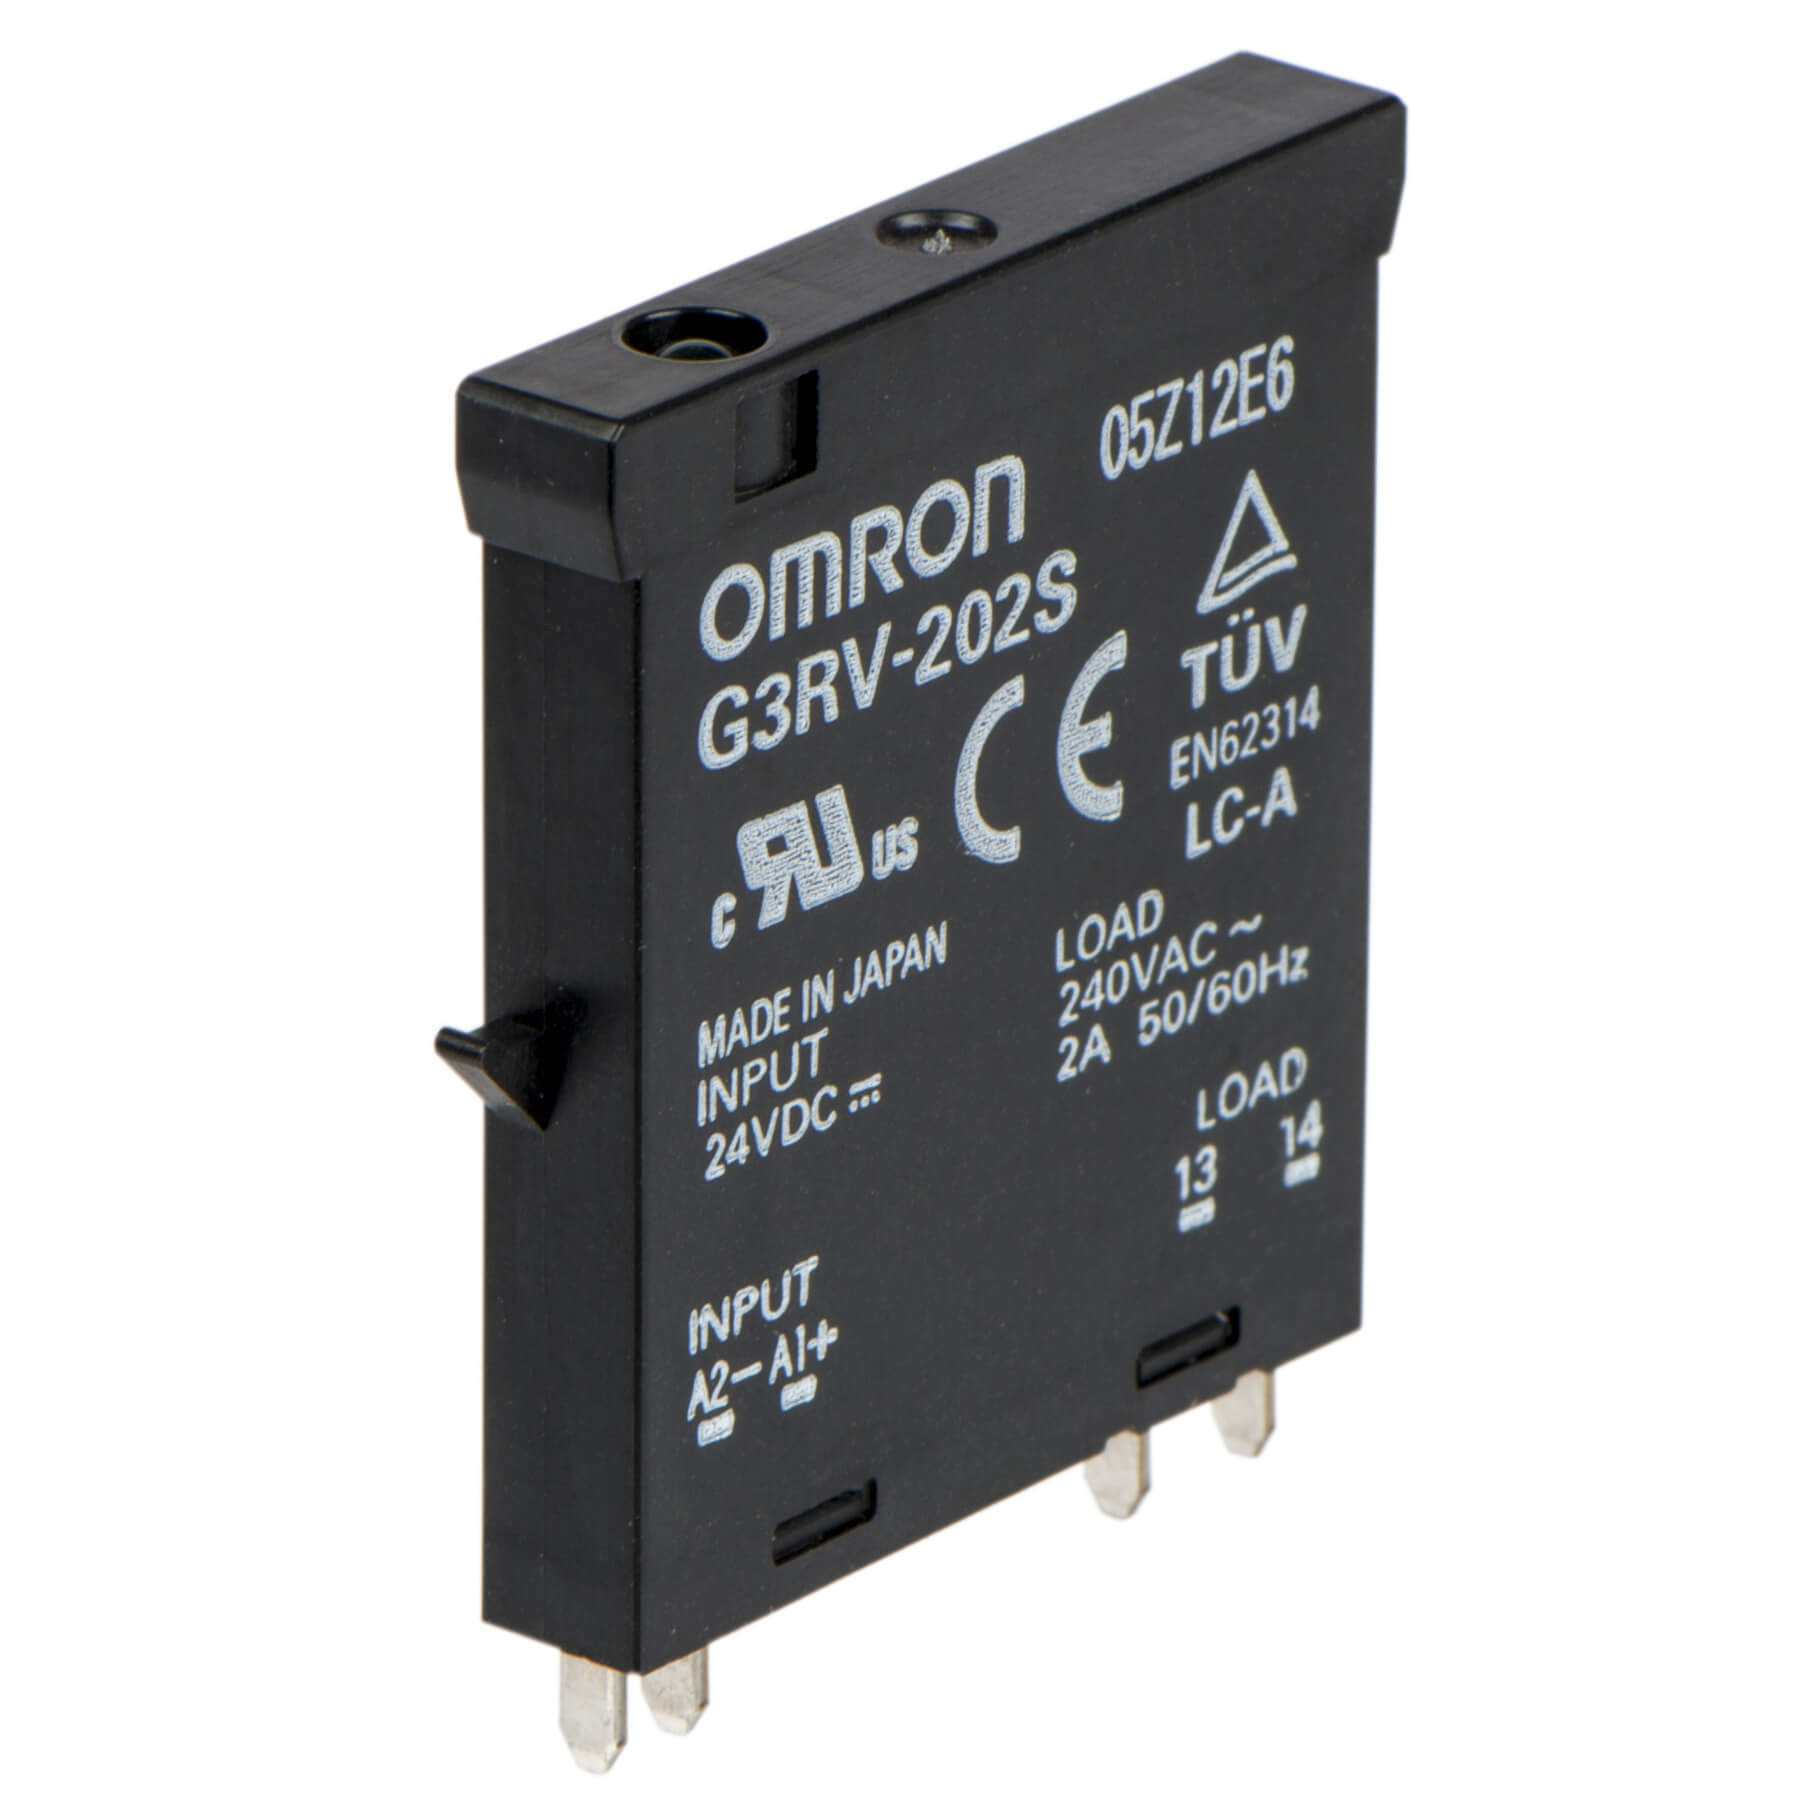 Solid State Relay for Maintenance for Slim I/O Relay G3RV-SR